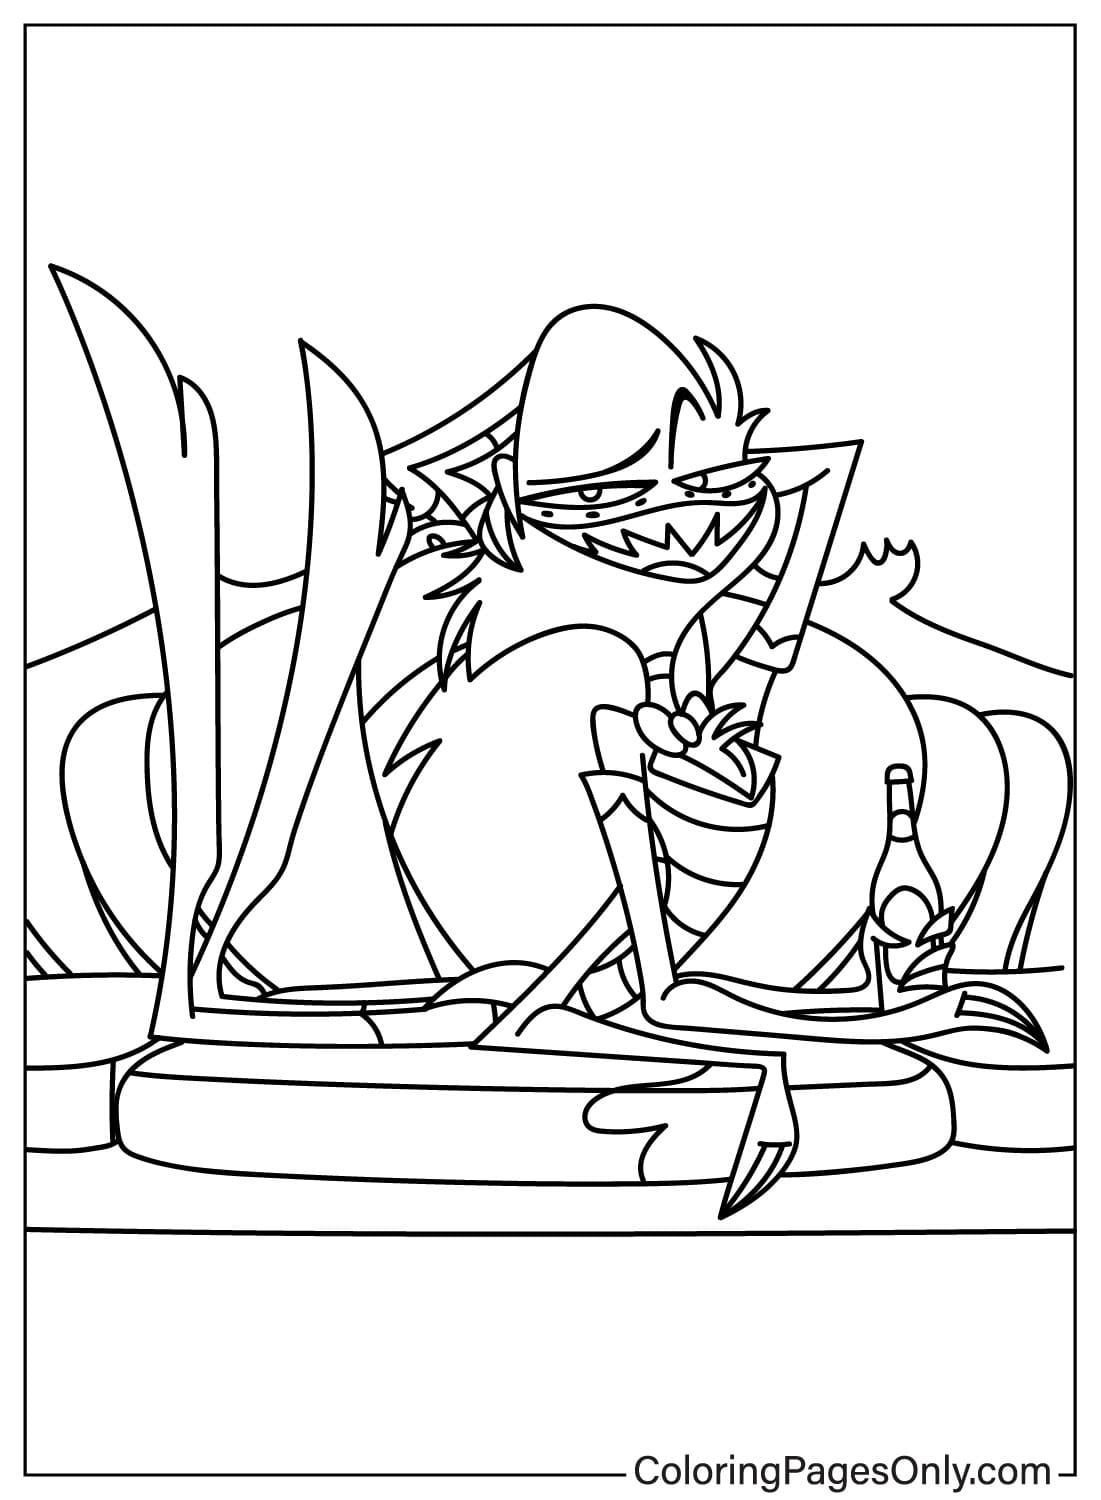 Angel Dust Coloring Page for Kids from Angel Dust